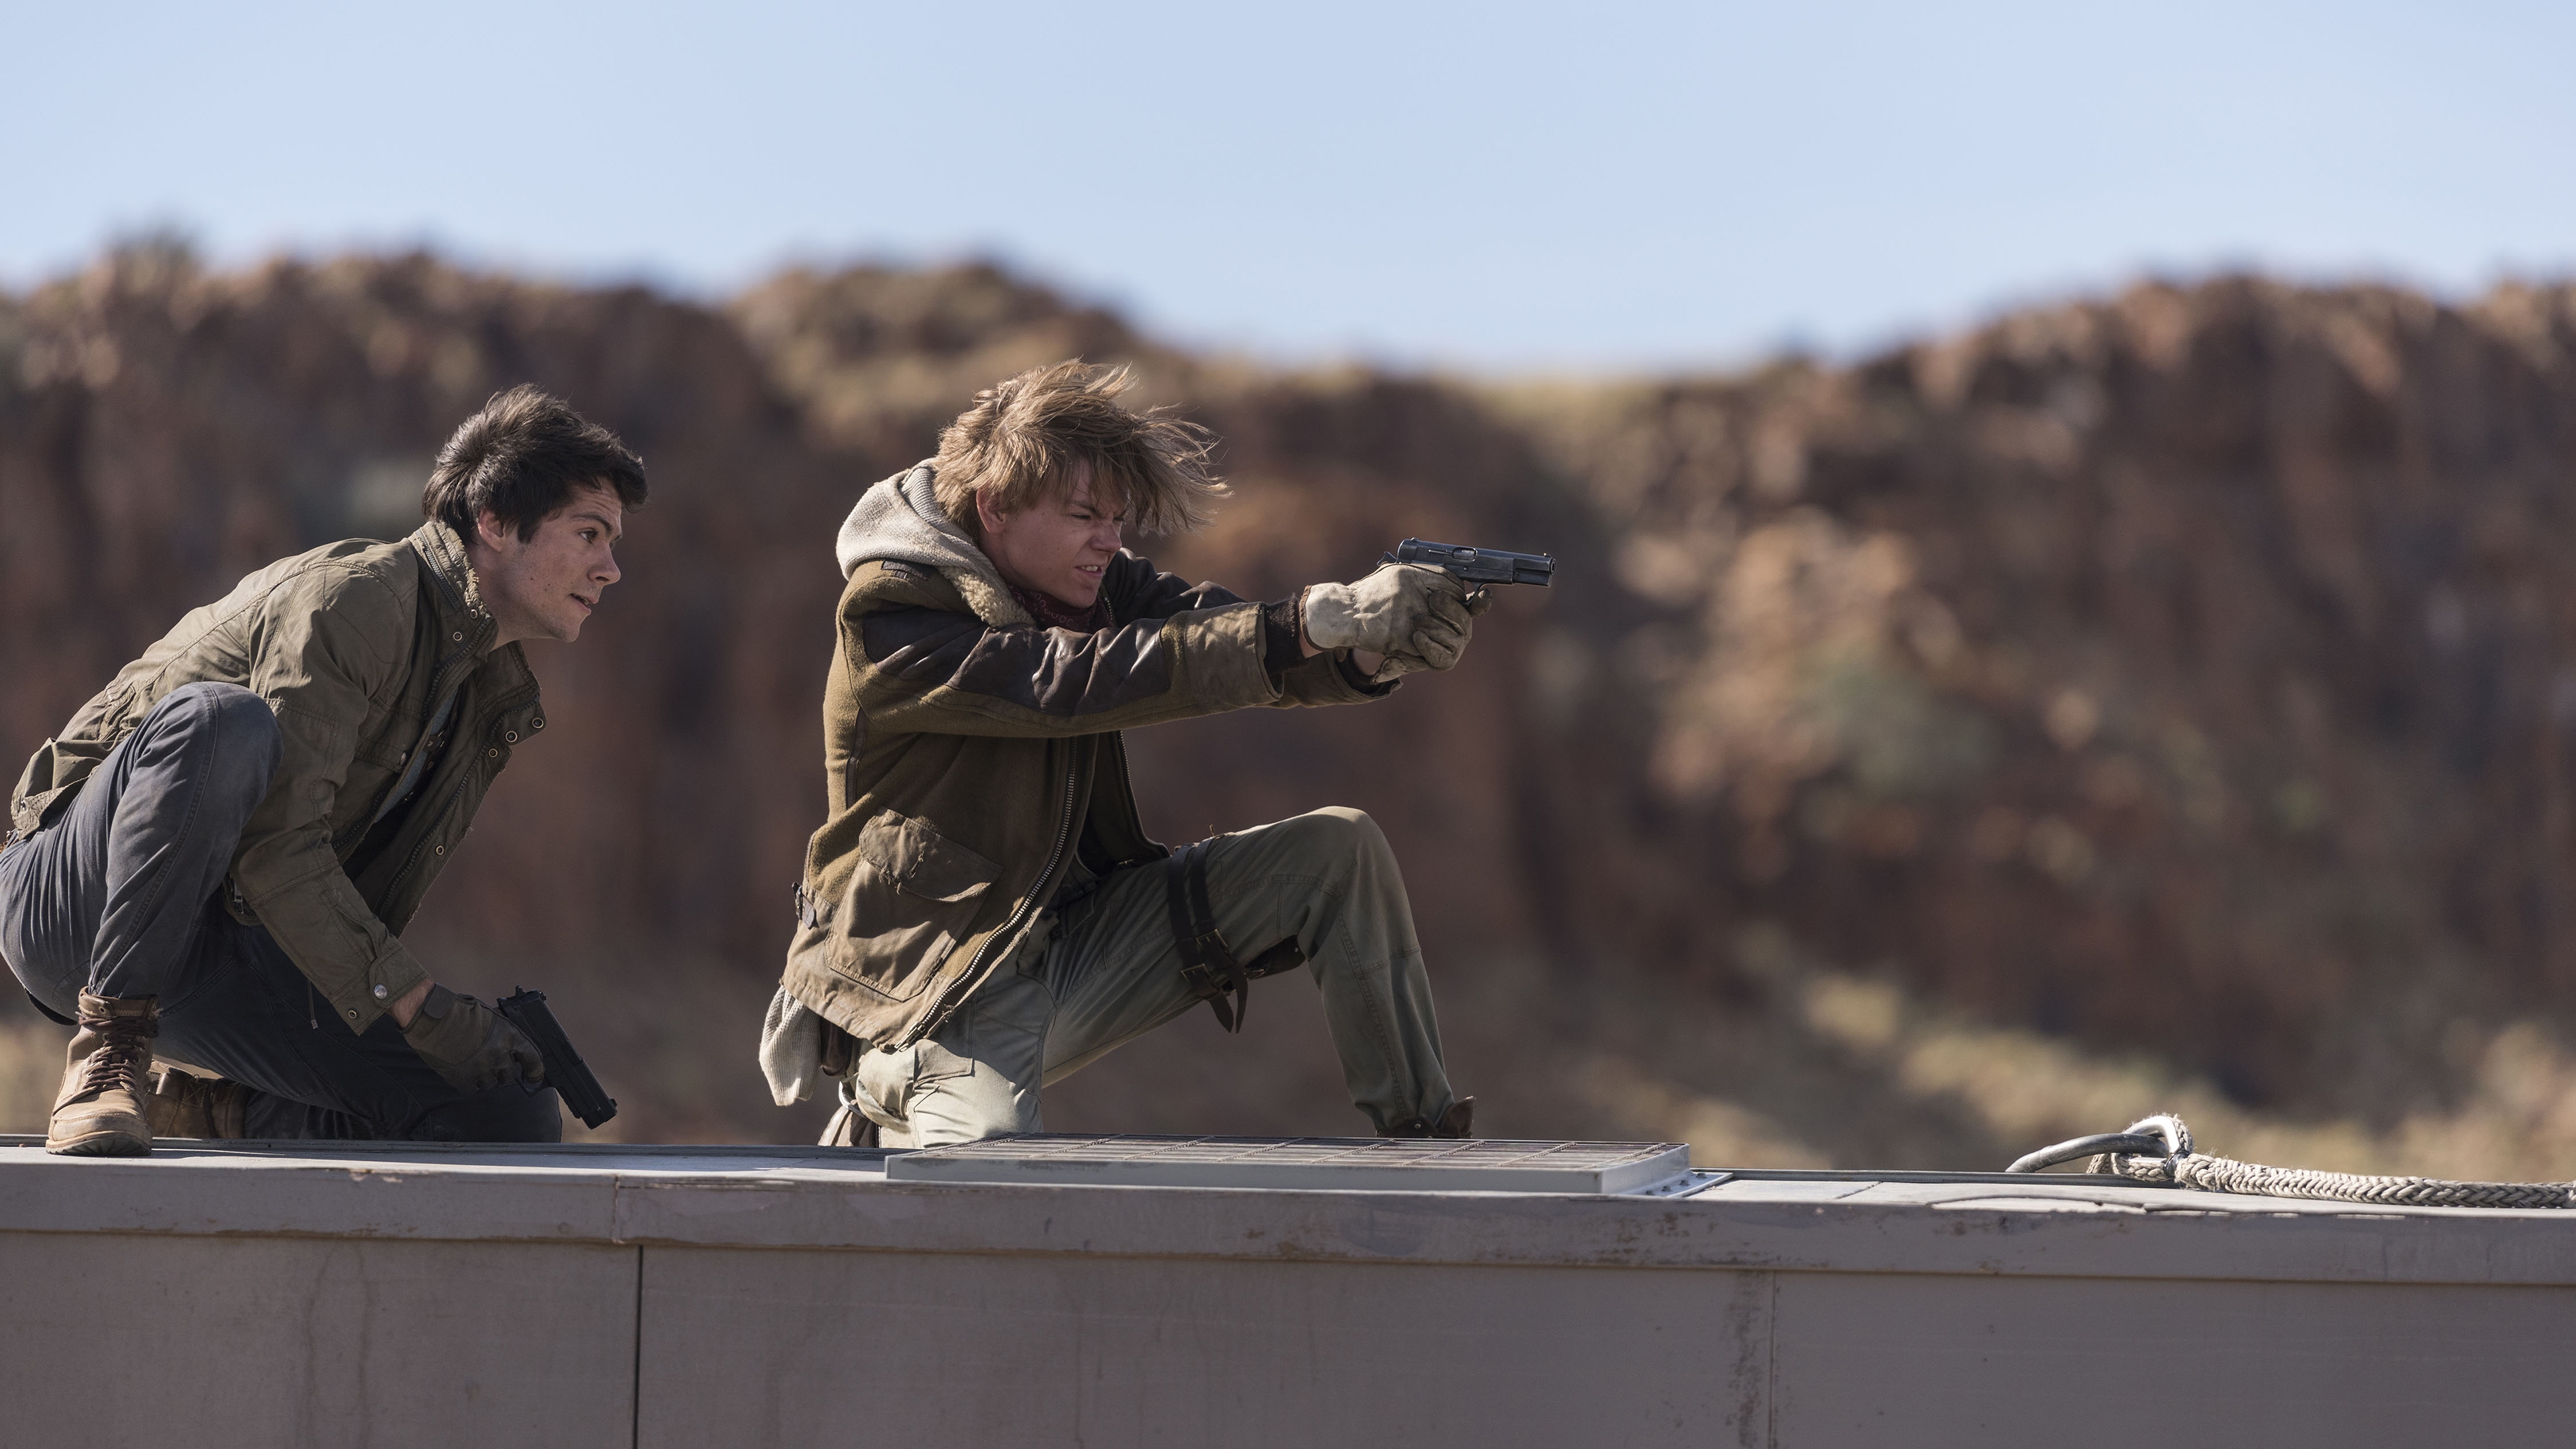 Movie Maze Runner: The Death Cure HD Wallpaper | Background Image